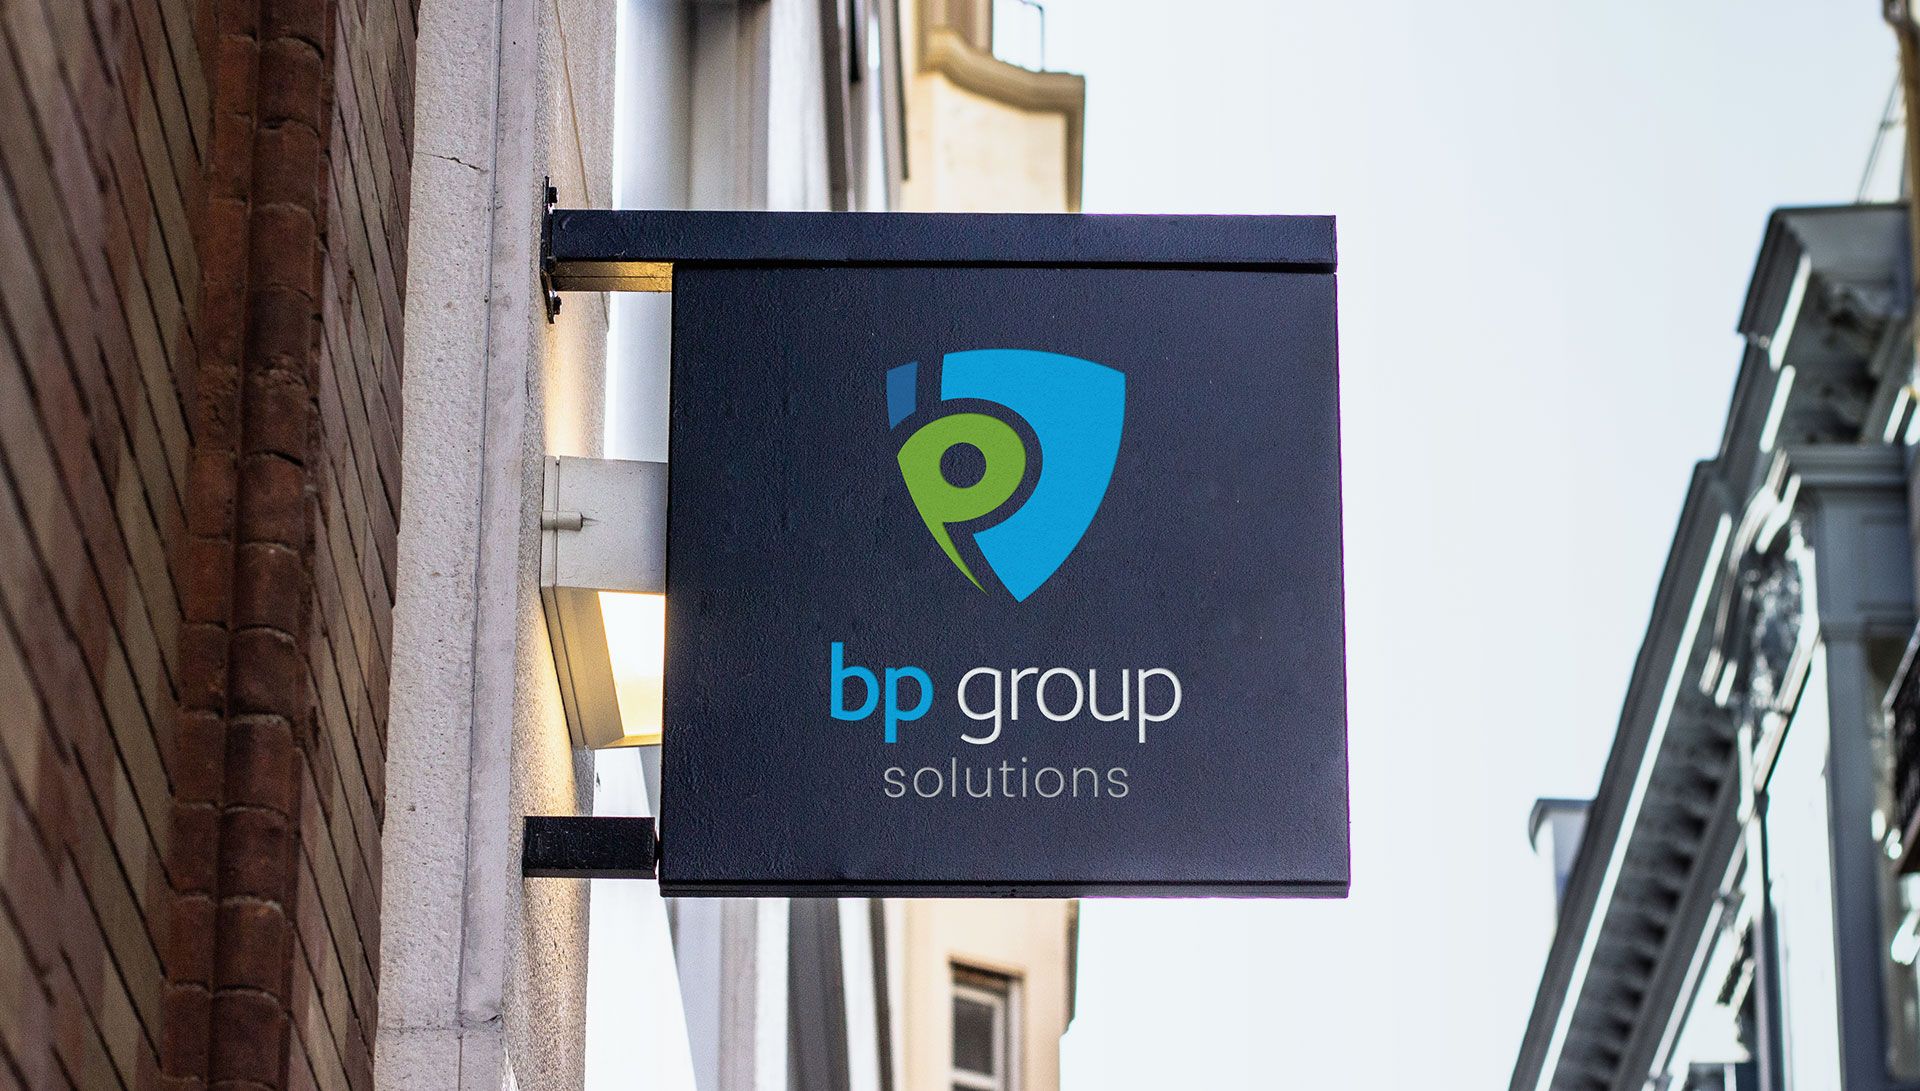 BP Group Solutions street sign